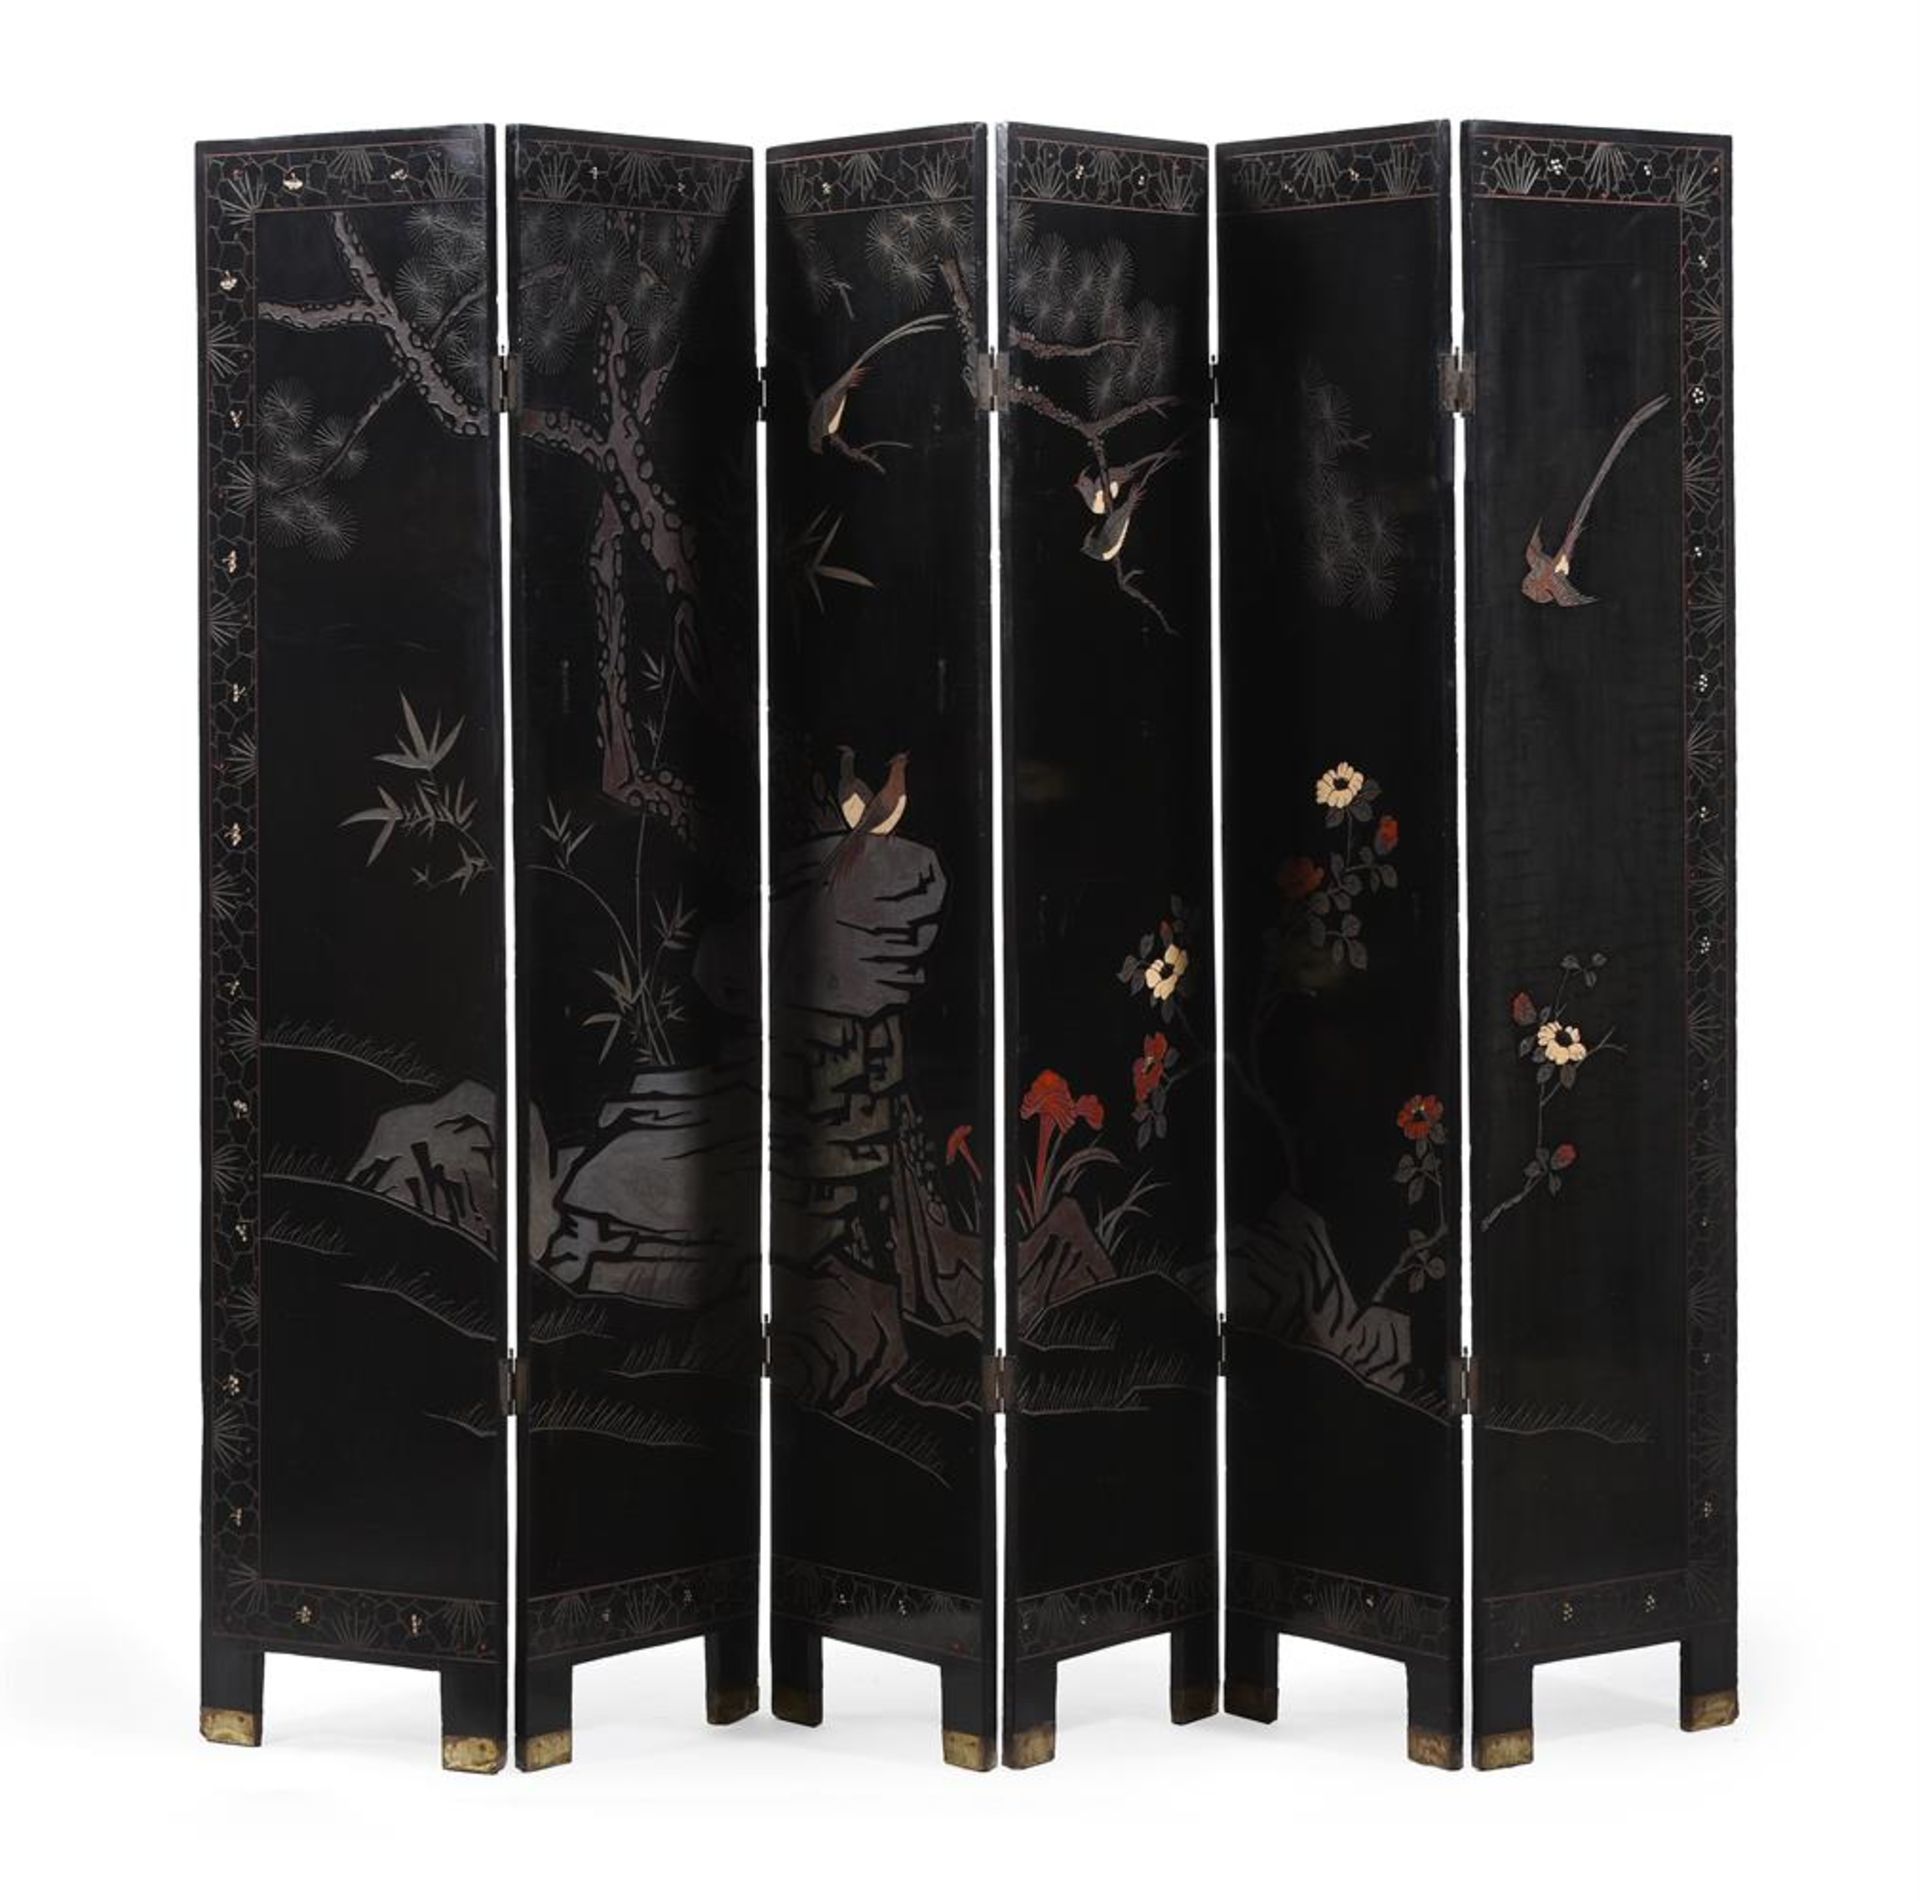 A JAPANESE BLACK LACQUER AND DECORATED SIX-FOLD SCREEN, MEIJI PERIOD - Image 4 of 4